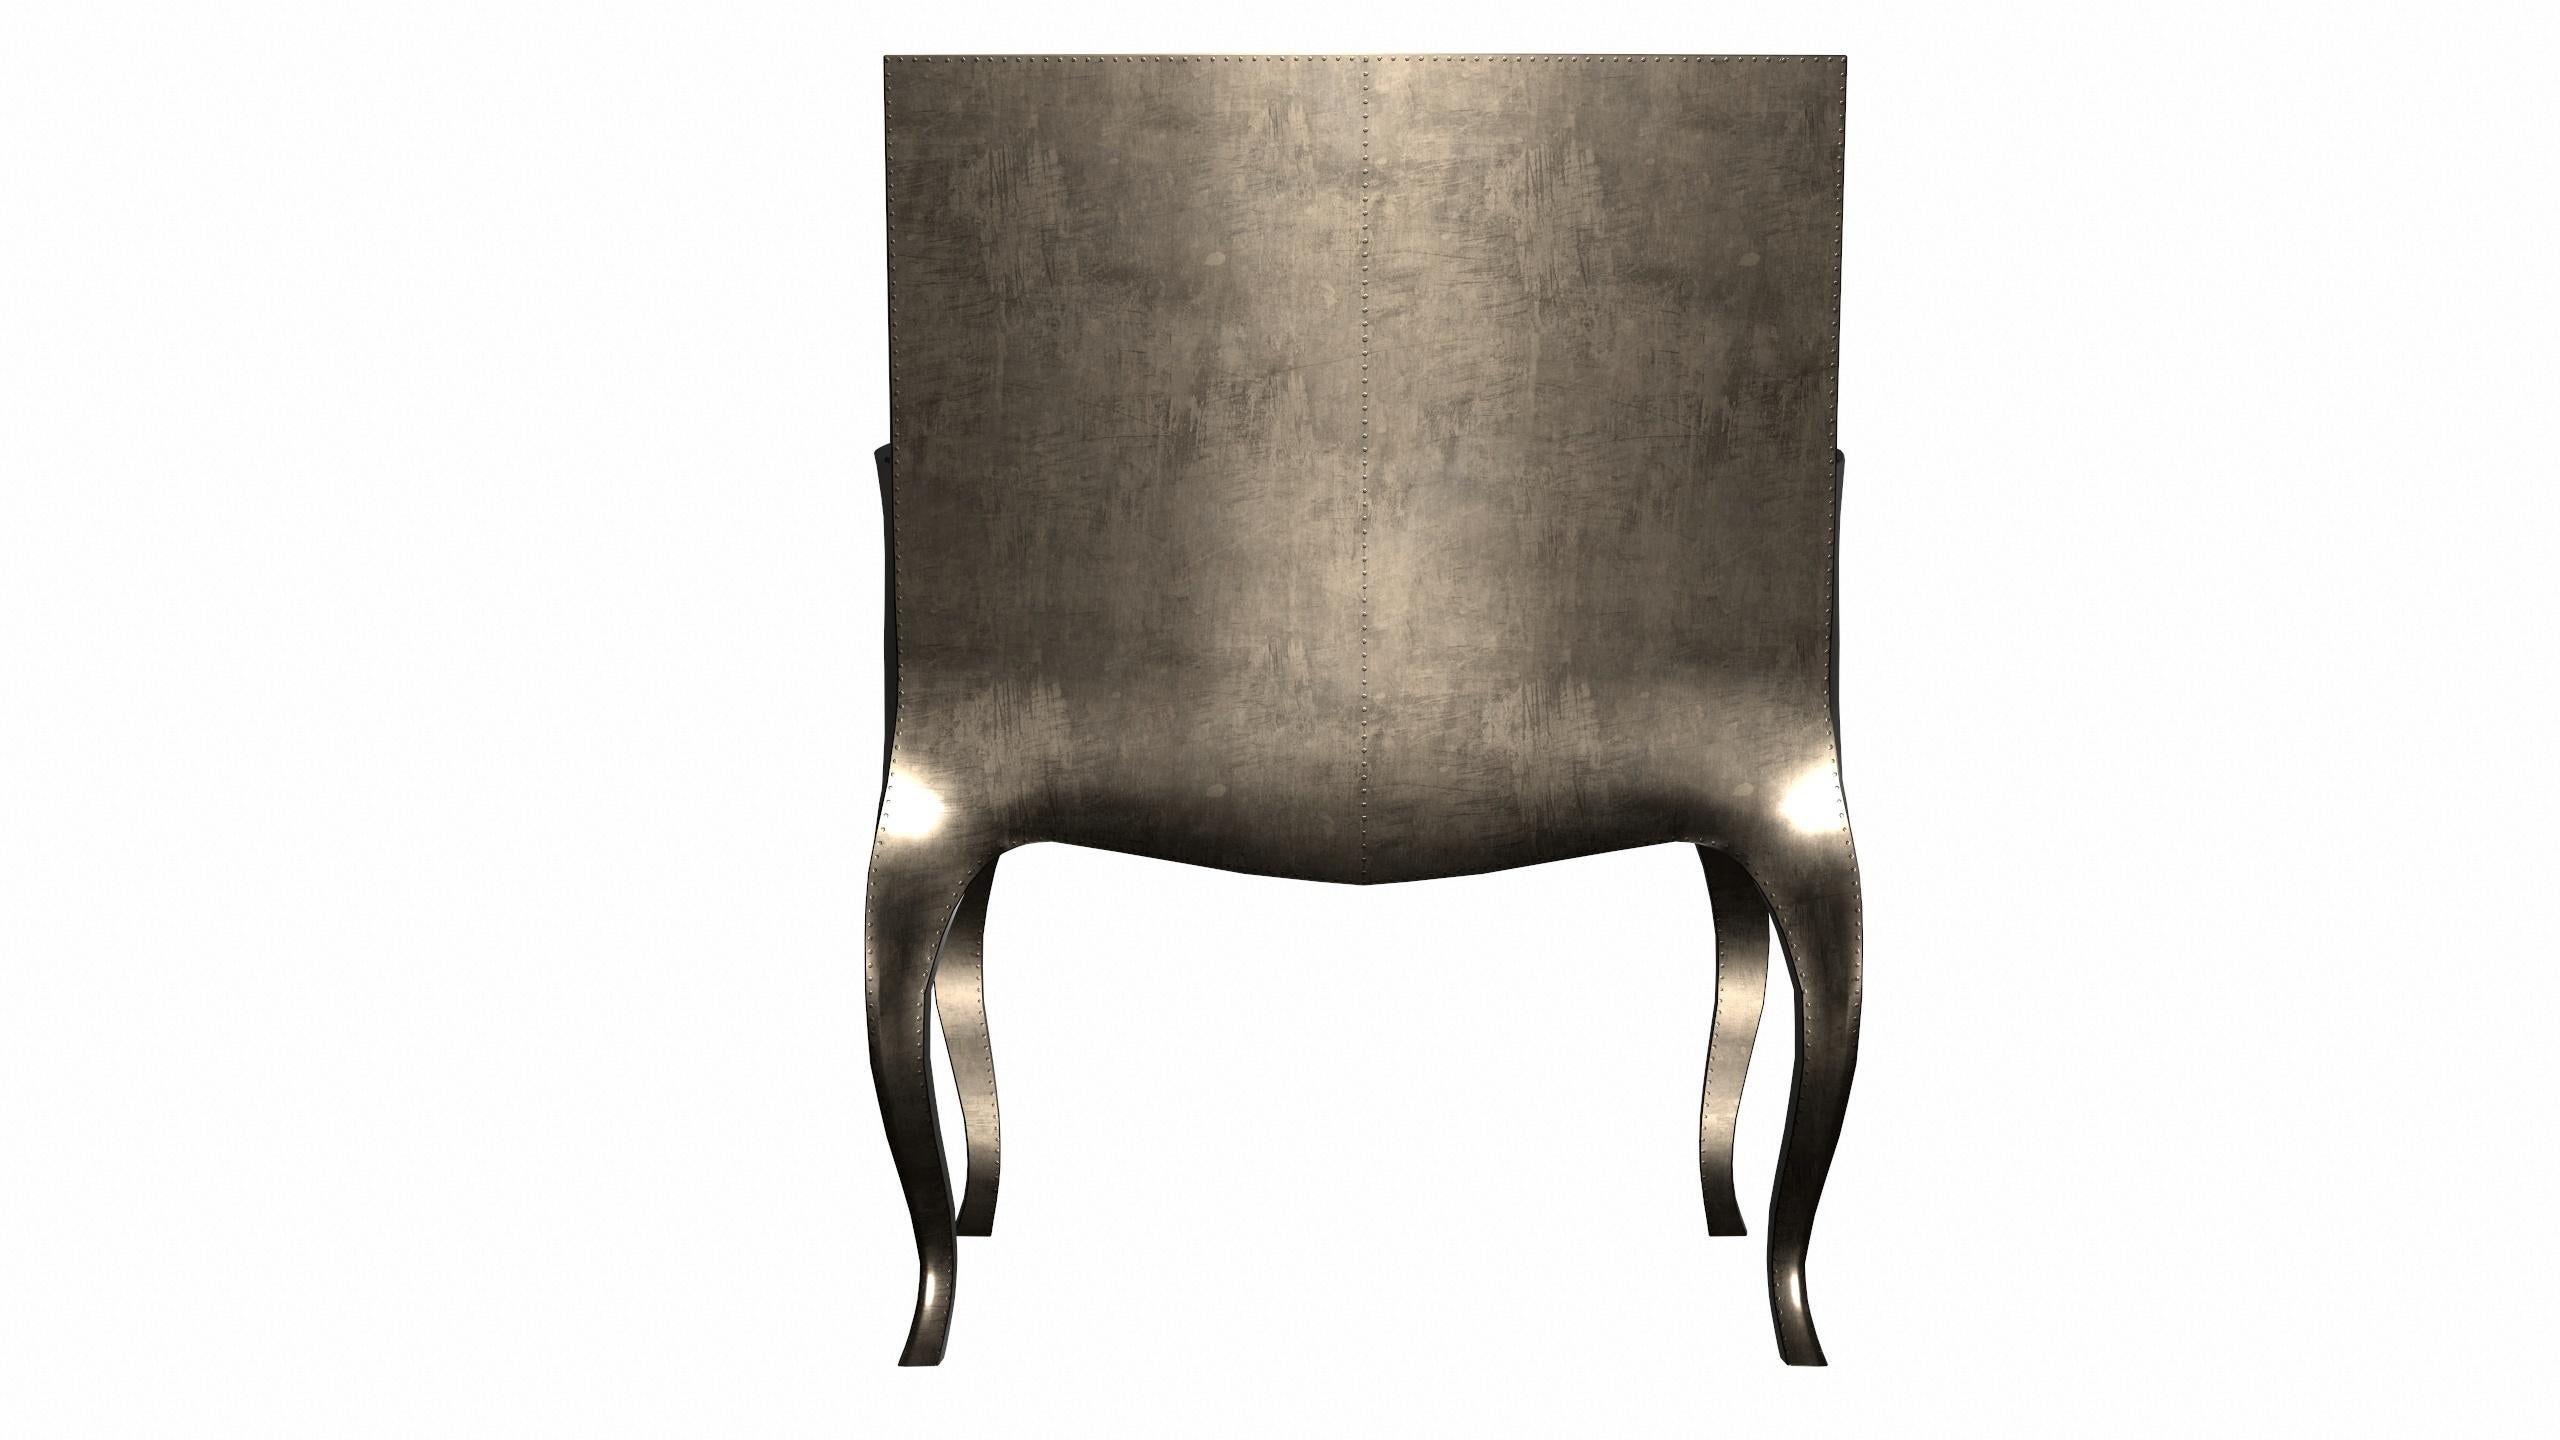 Hammered Deco Chairs in Smooth Antique Bronze by Paul Mathieu for Stephanie Odegard For Sale